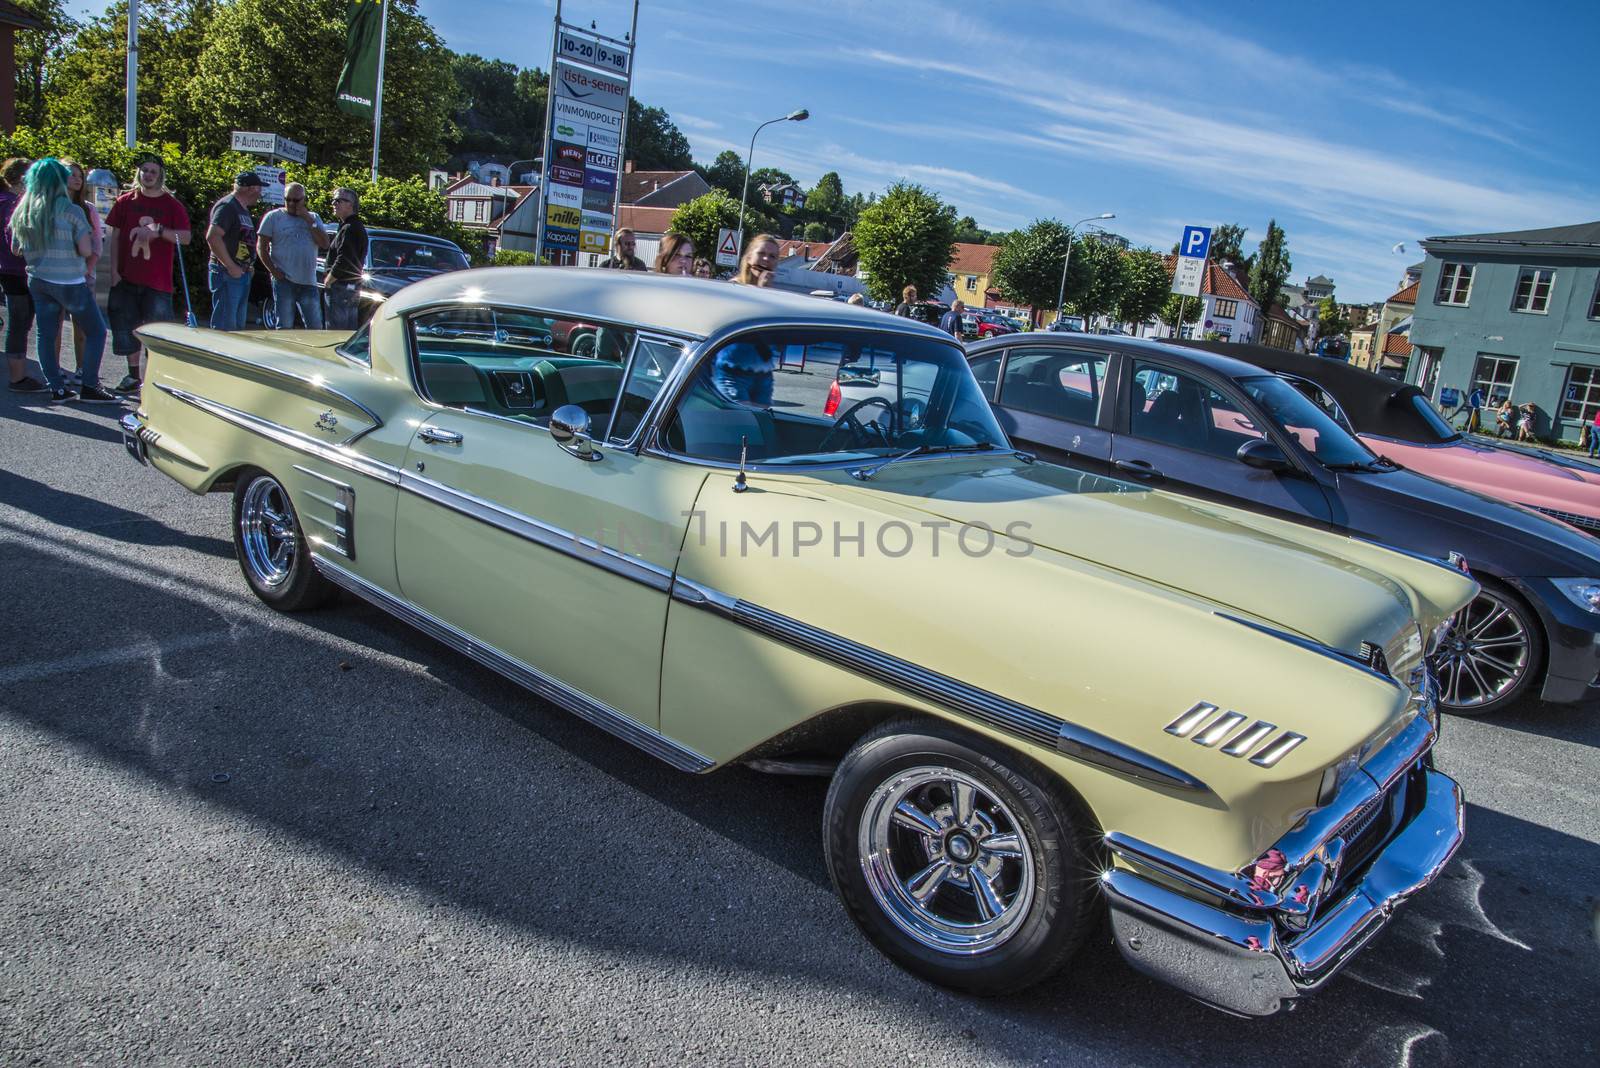 classic american cars, chevrolet impala by steirus